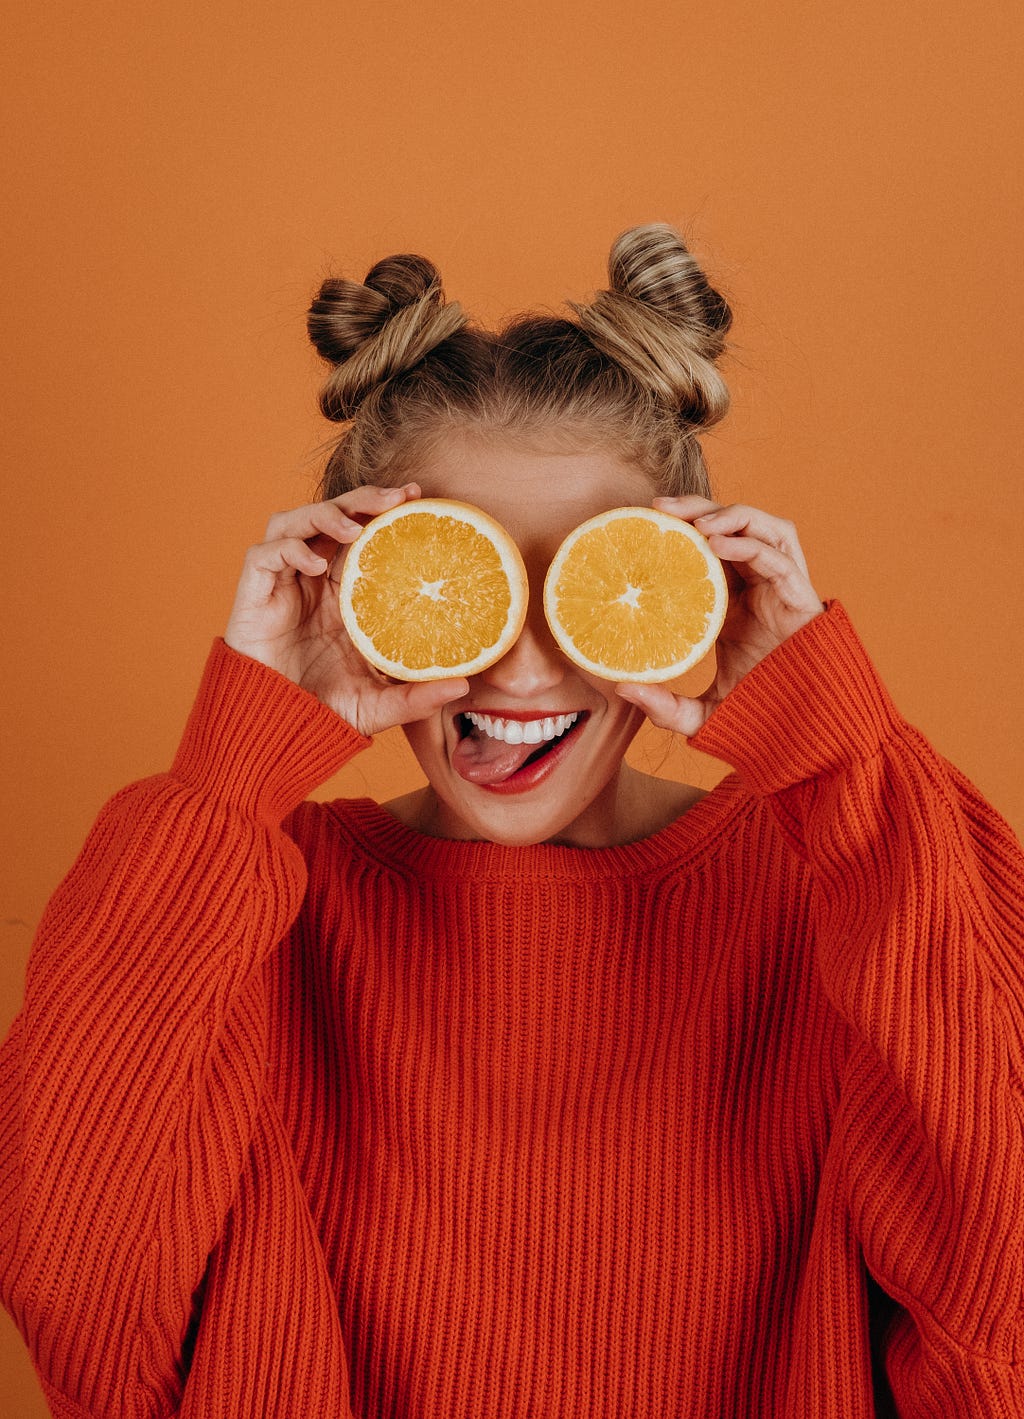 A young woman in a bright sweater smiling and holding two halves of orange in front of her eyes